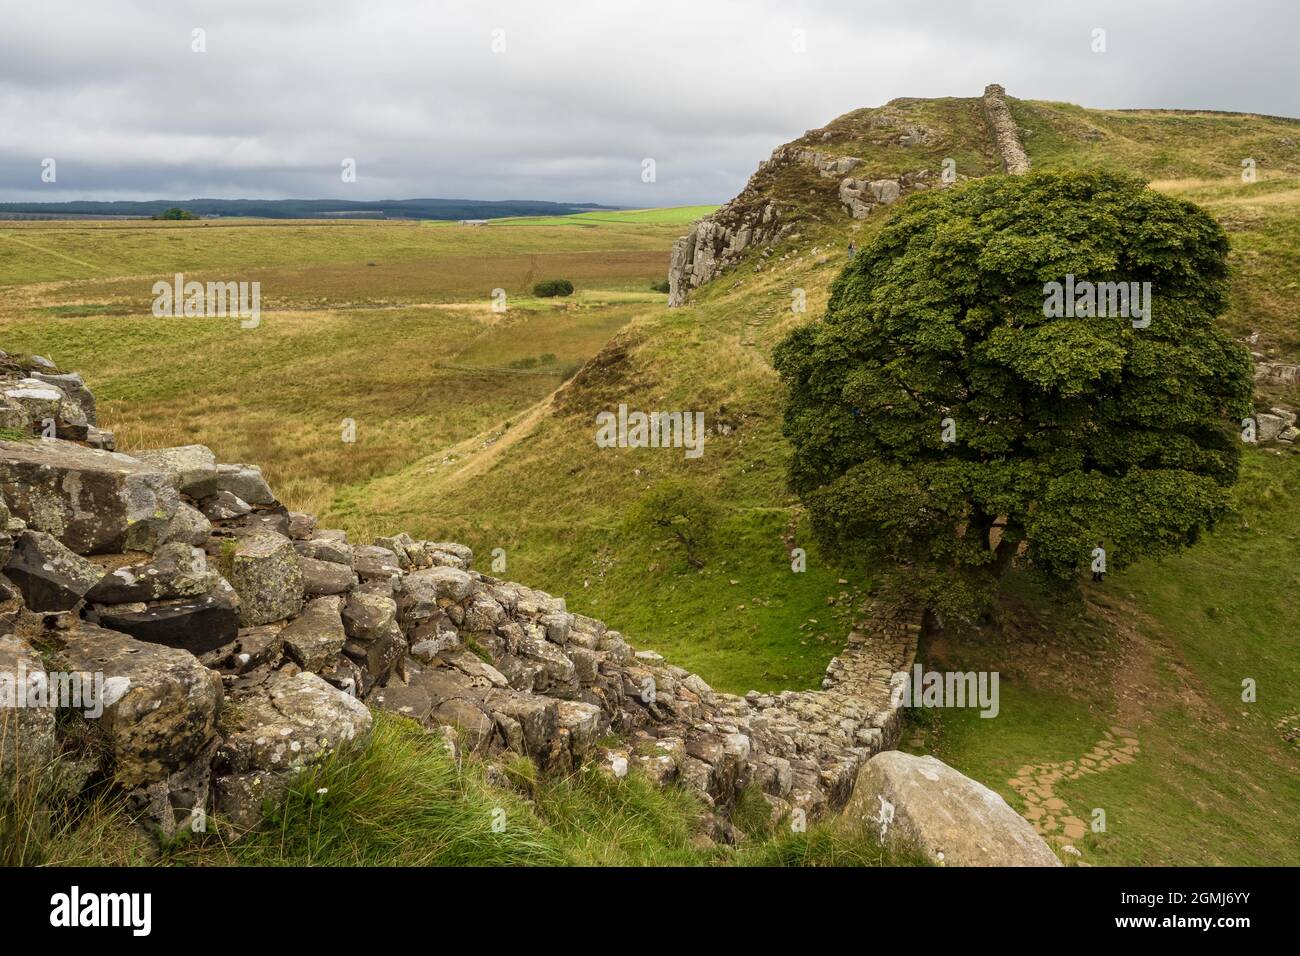 The Hadrian’s Wall Path is an 84 mile (135 km) long National Trail stretching coast to coast across northern England, from Wallsend, Newcastle upon Ty Stock Photo